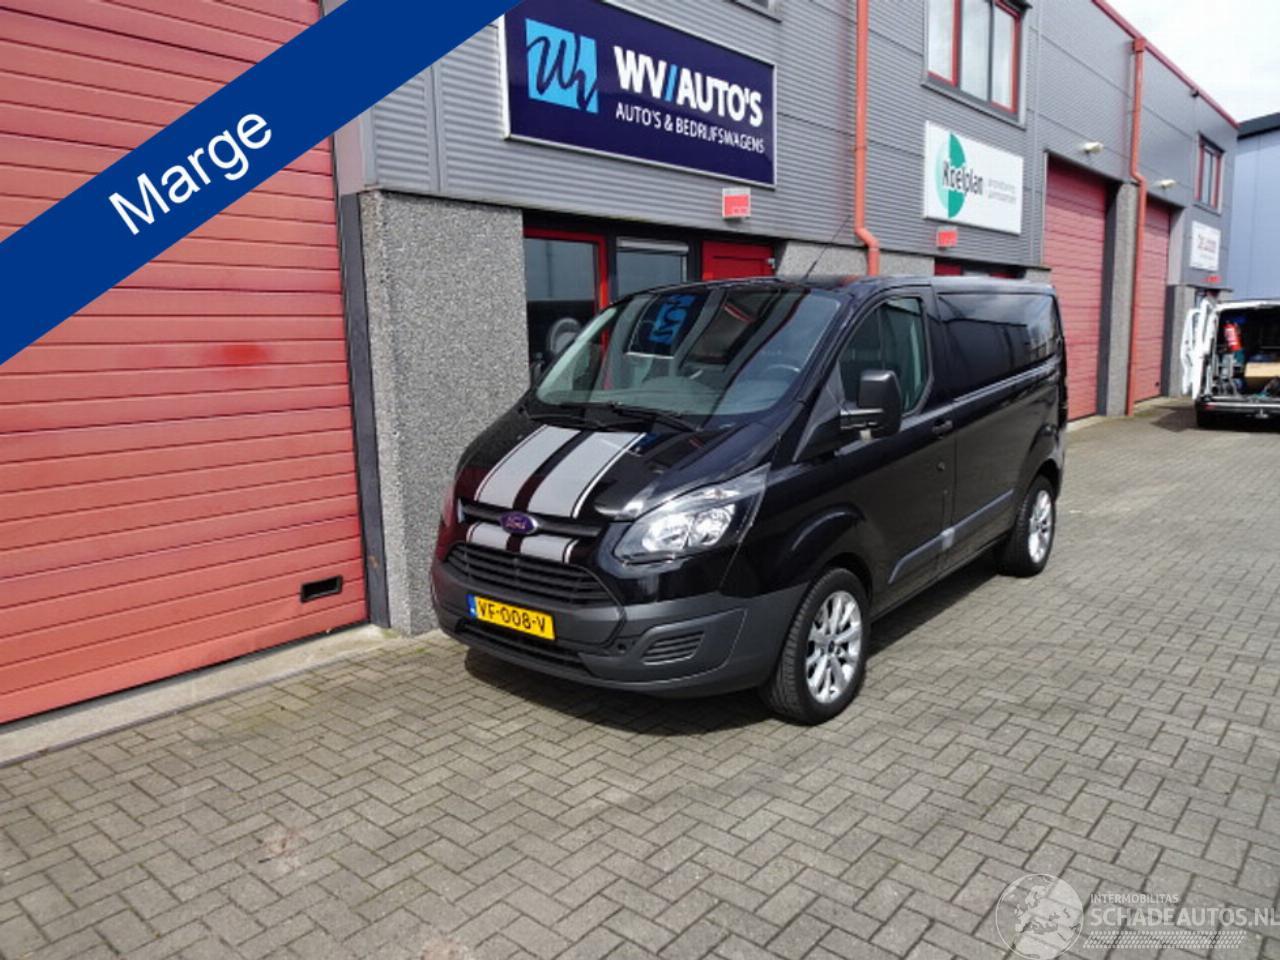 Ford Transit Custom 270 2.2 TDCI L1H1 Ambiente 3 zits MARGE !!!!!!!!!